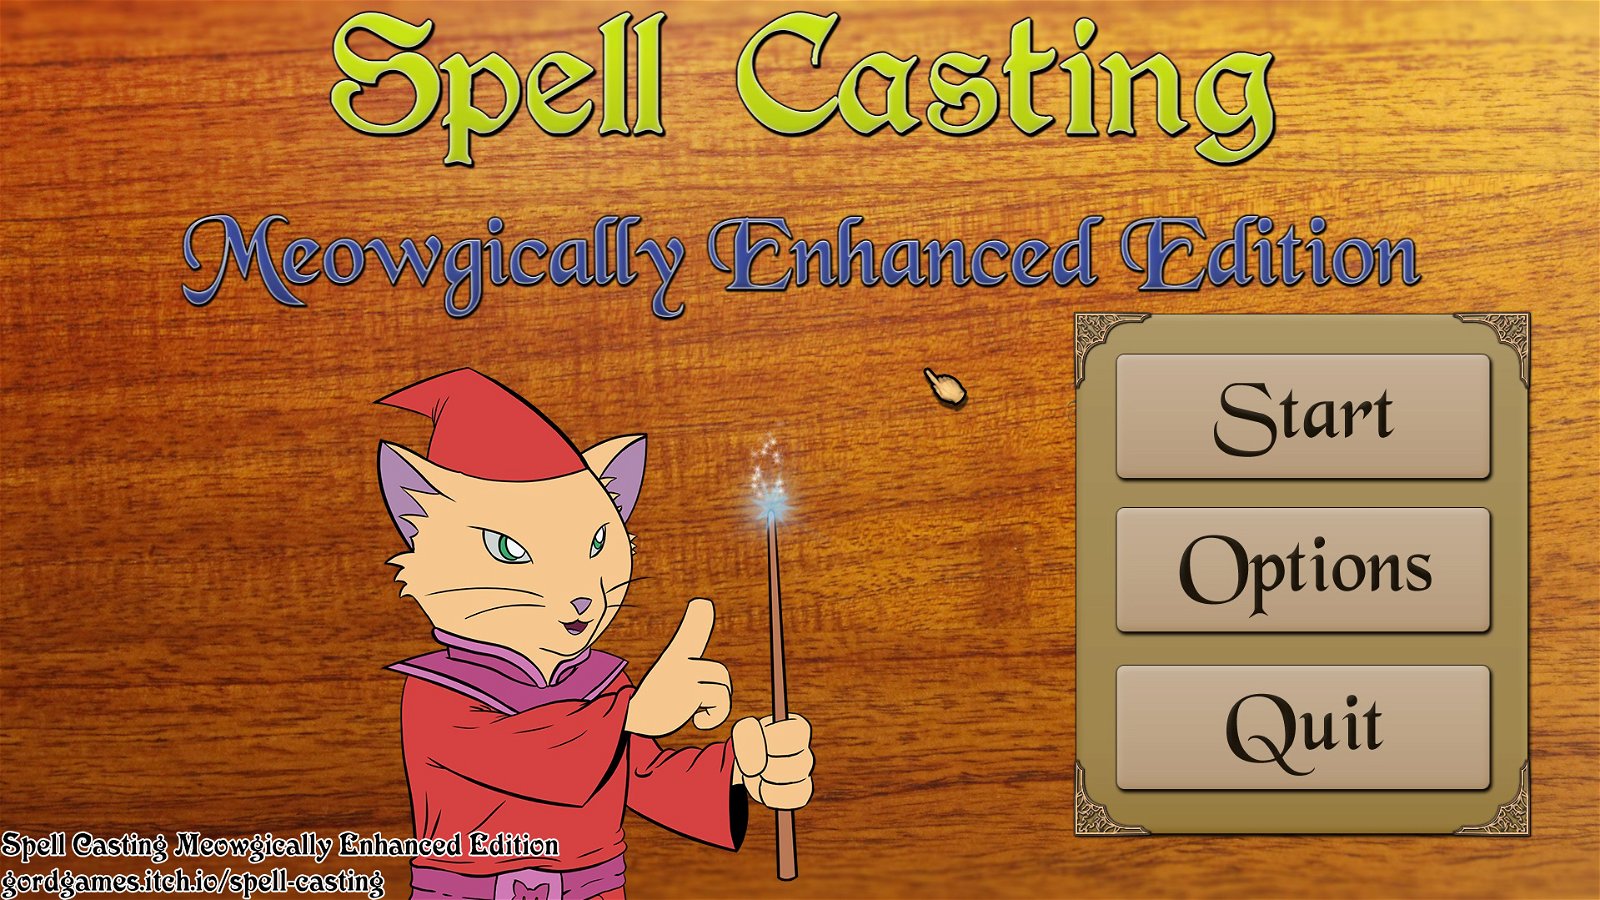 Image of Spell Casting: Meowgically Enhanced Edition